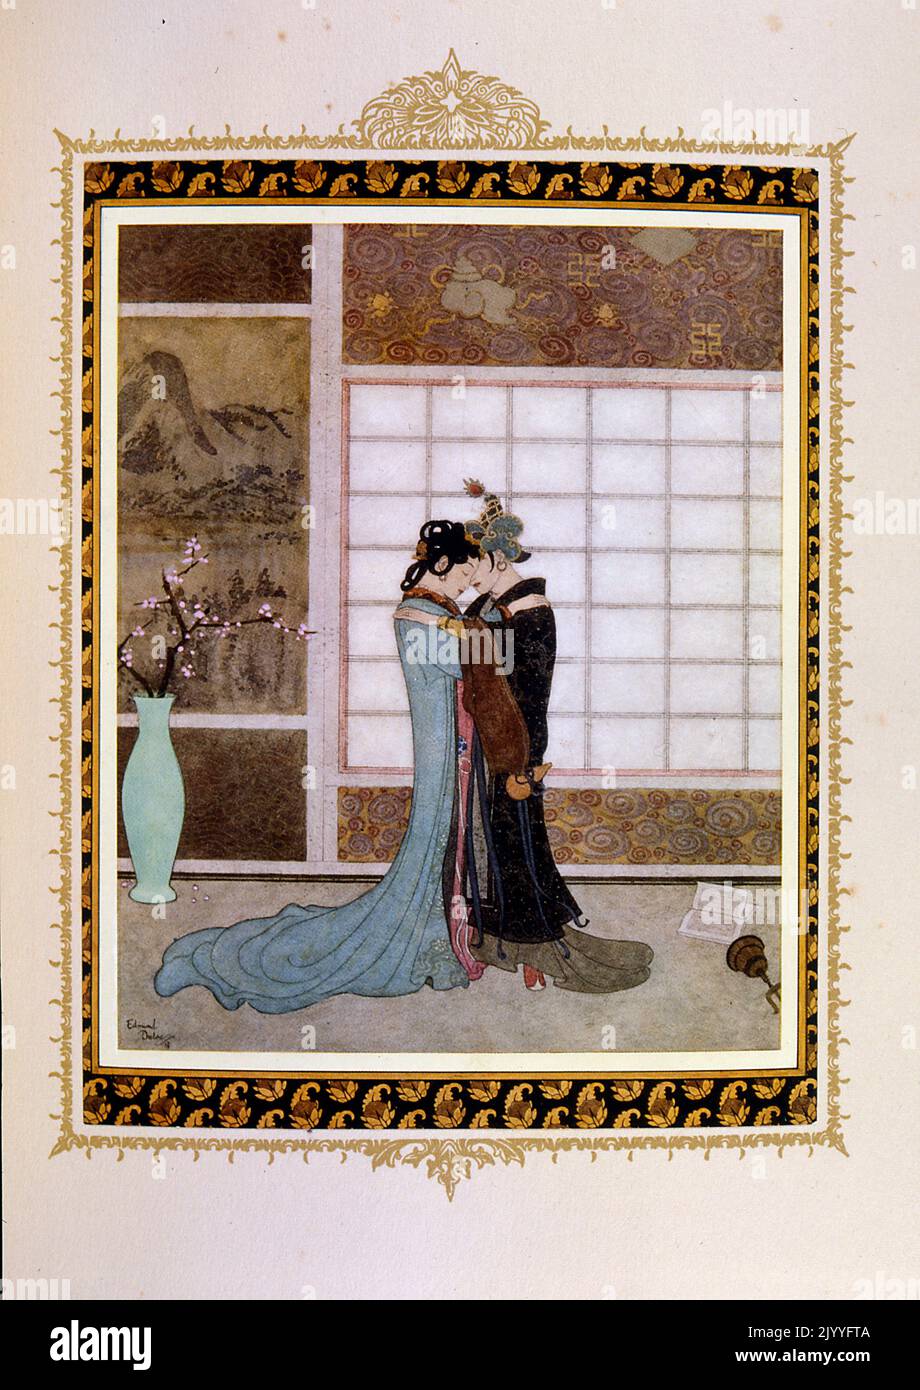 Illustration from 'Princess Badoura: A Tale from the Arabian Nights' depicting the Princess embracing her mother. Illustrated by Edmund Dulac (1882-1953), a French British naturalised magazine and book illustrator. Stock Photo